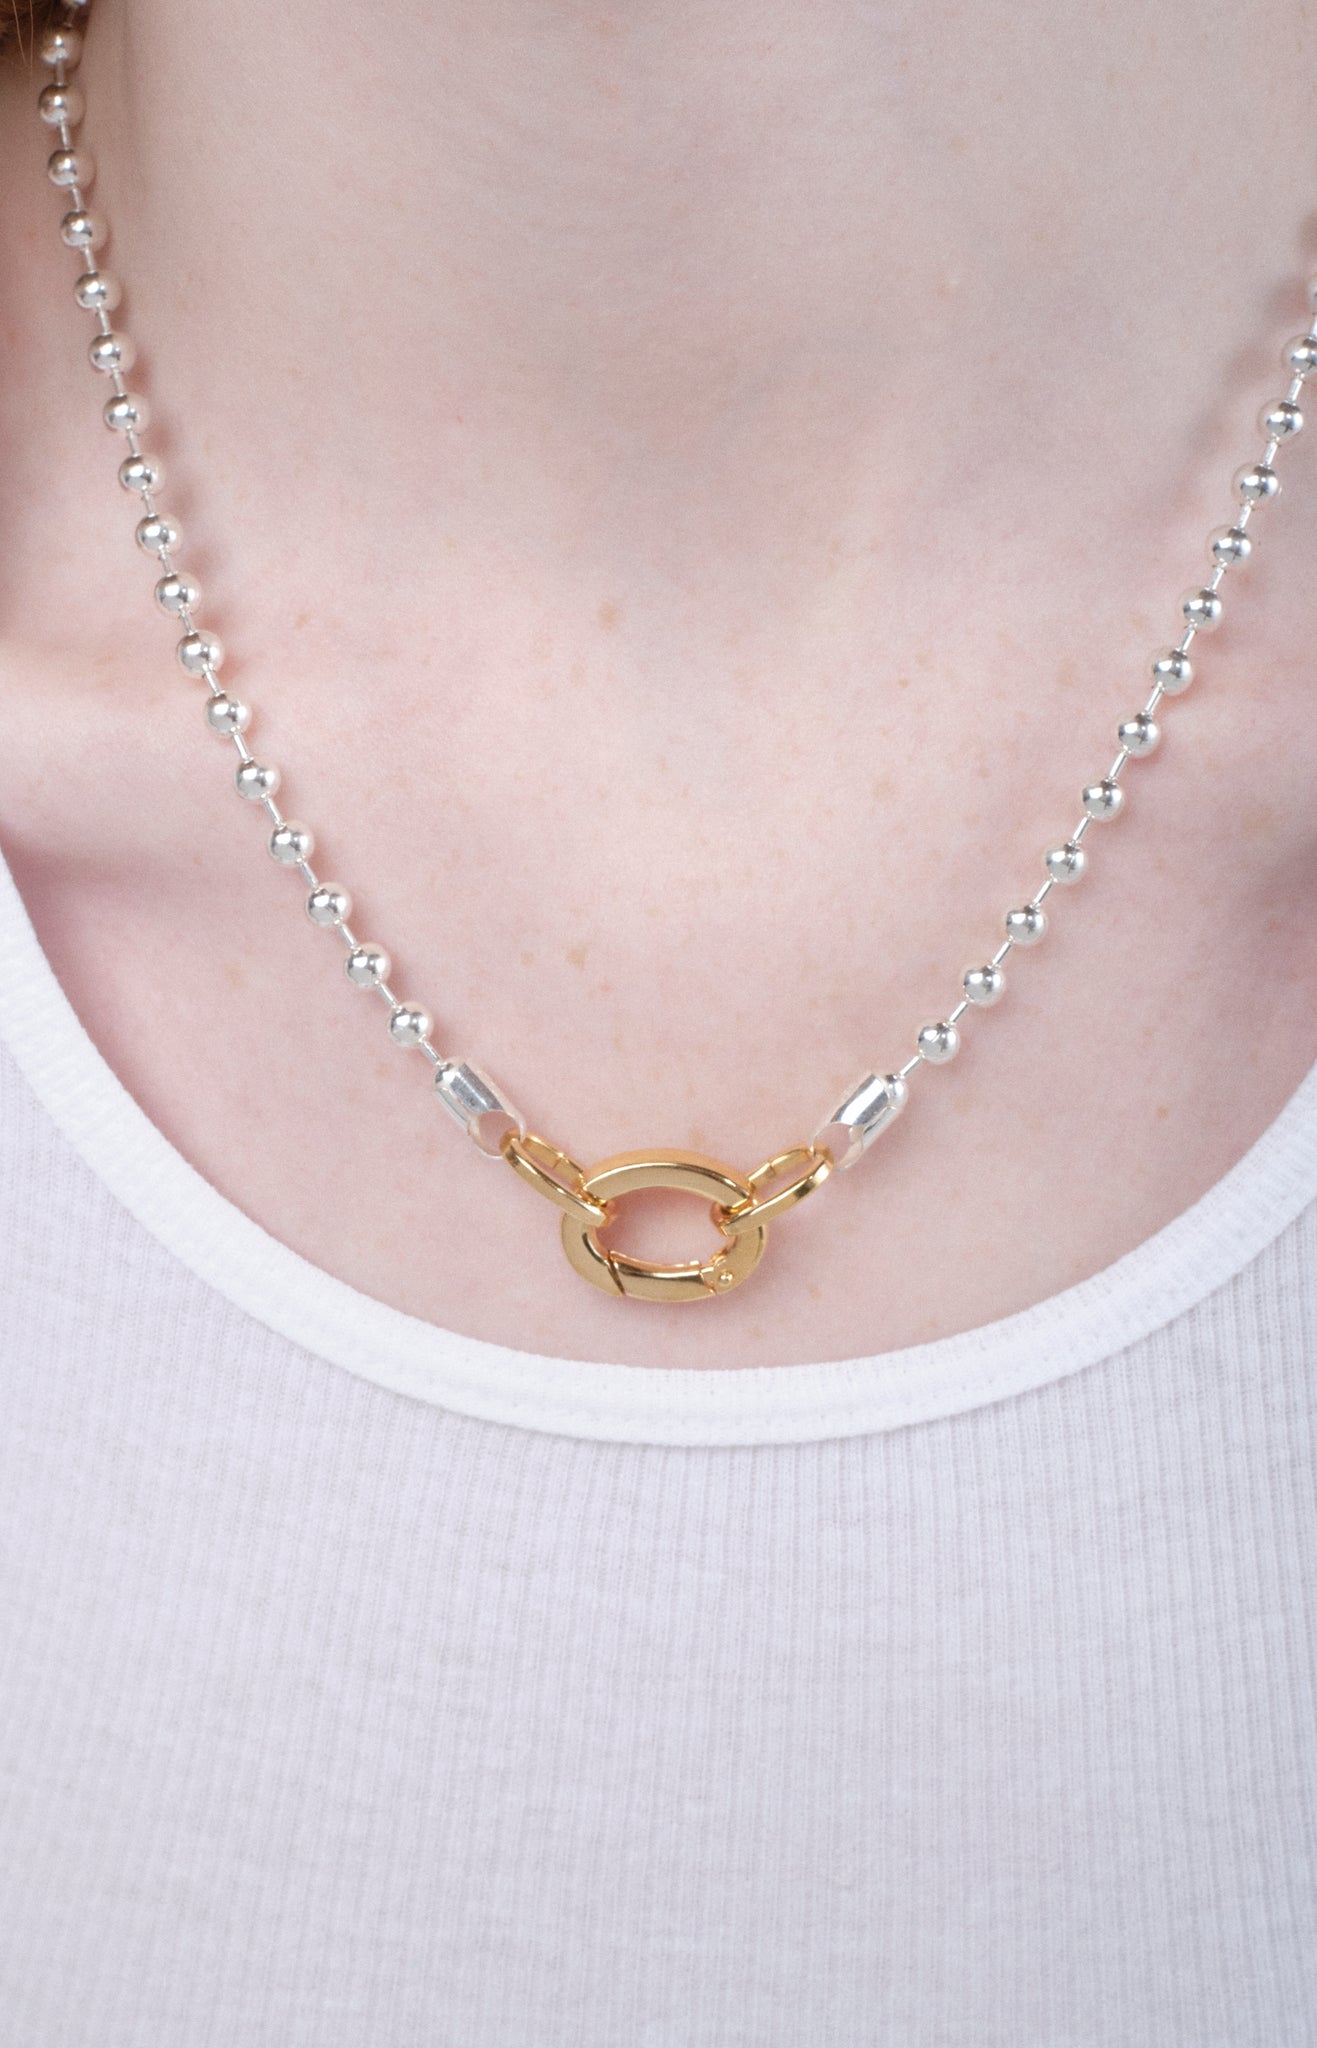 The Blake Chain Necklace